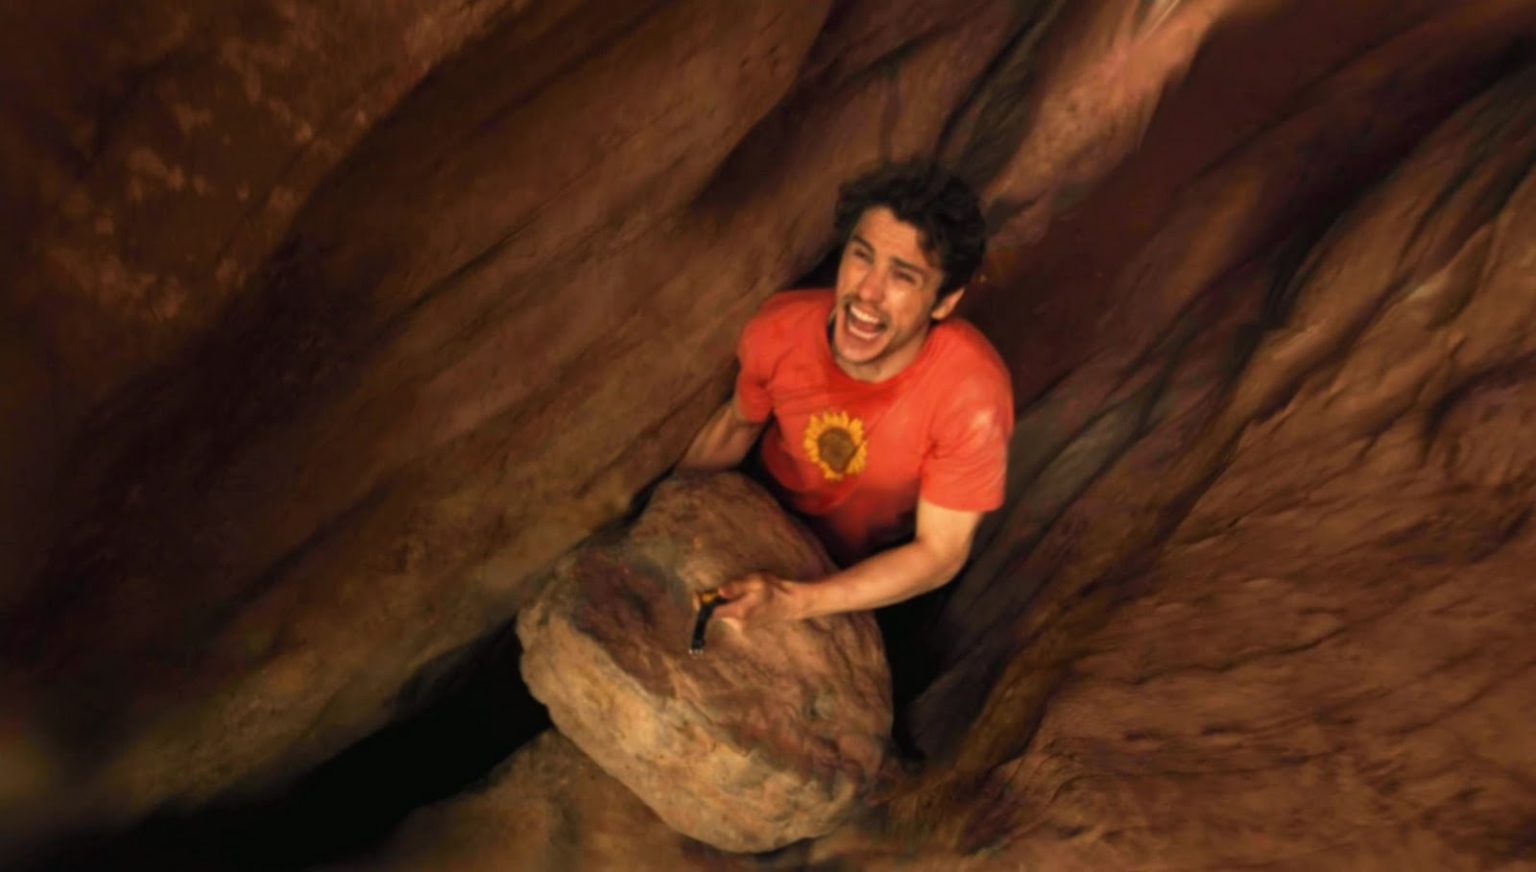 127 Hours (2010) | Qwipster | Movie Reviews 127 Hours (2010)